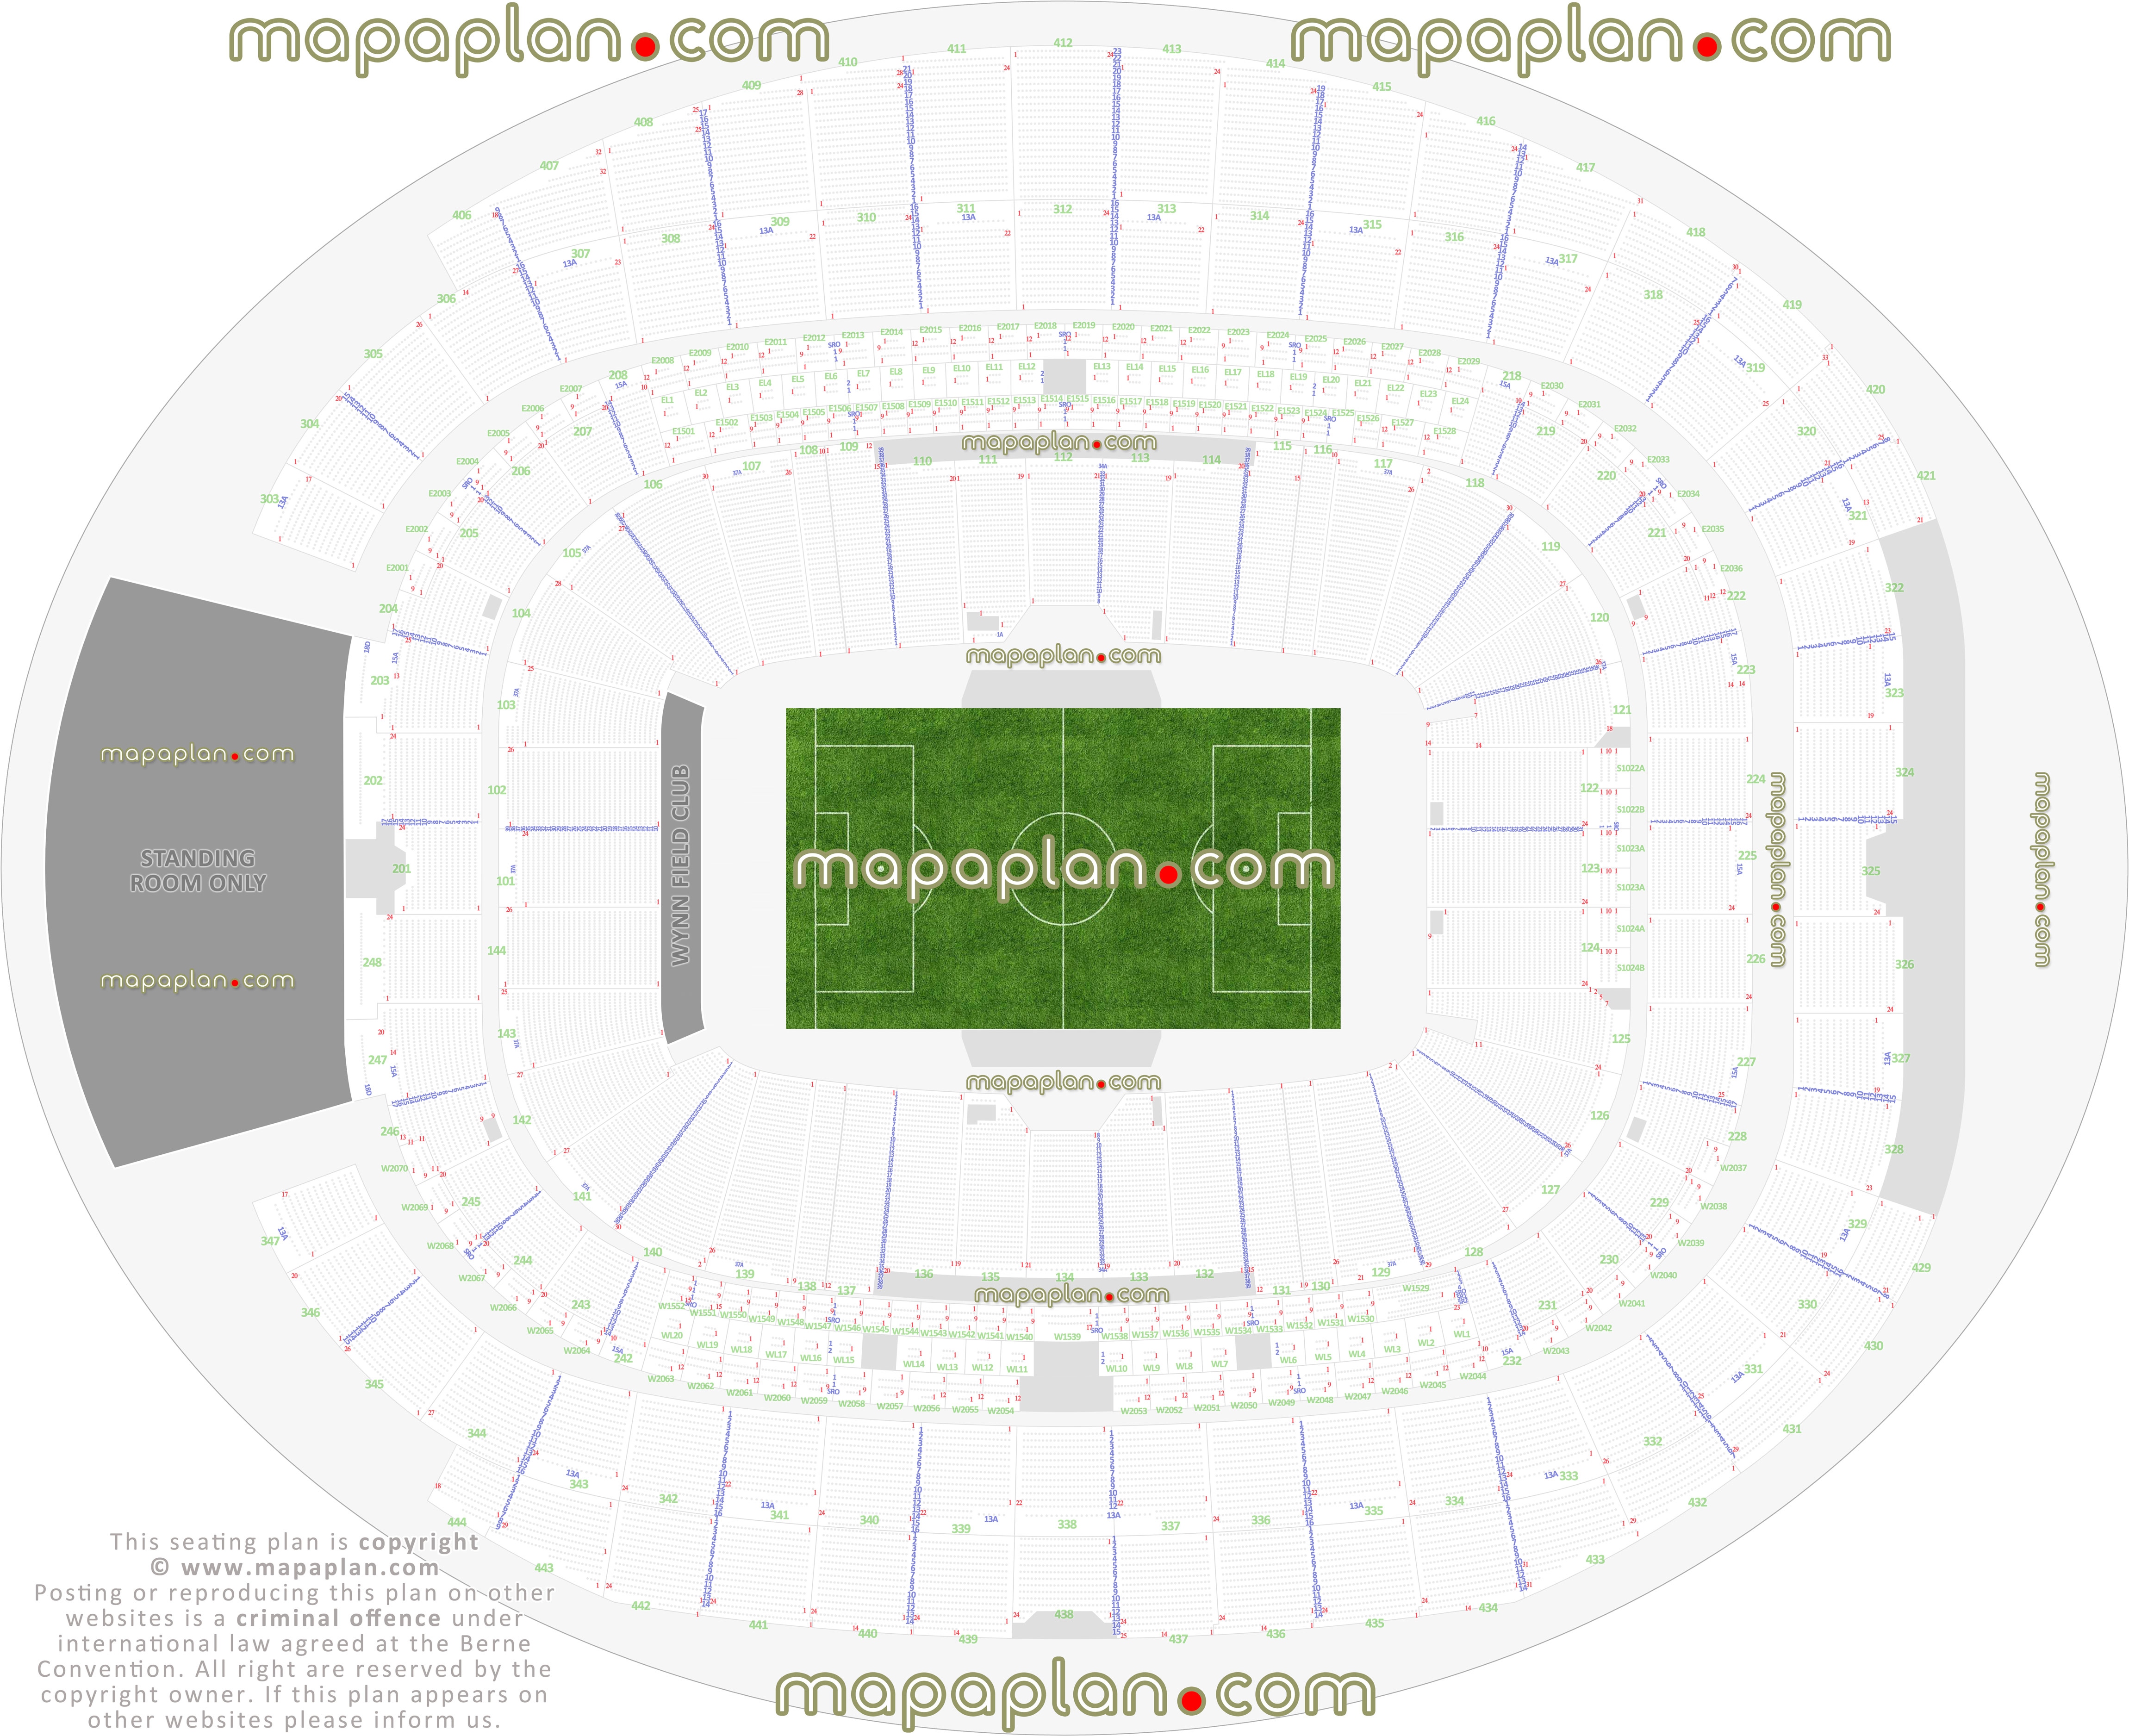 Las Vegas Allegiant Stadium seating chart soccer match seating capacity arrangement plan interactive virtual 3d detailed stadium image layout full exact row numbering system seats per row general admission standing room only vip suites